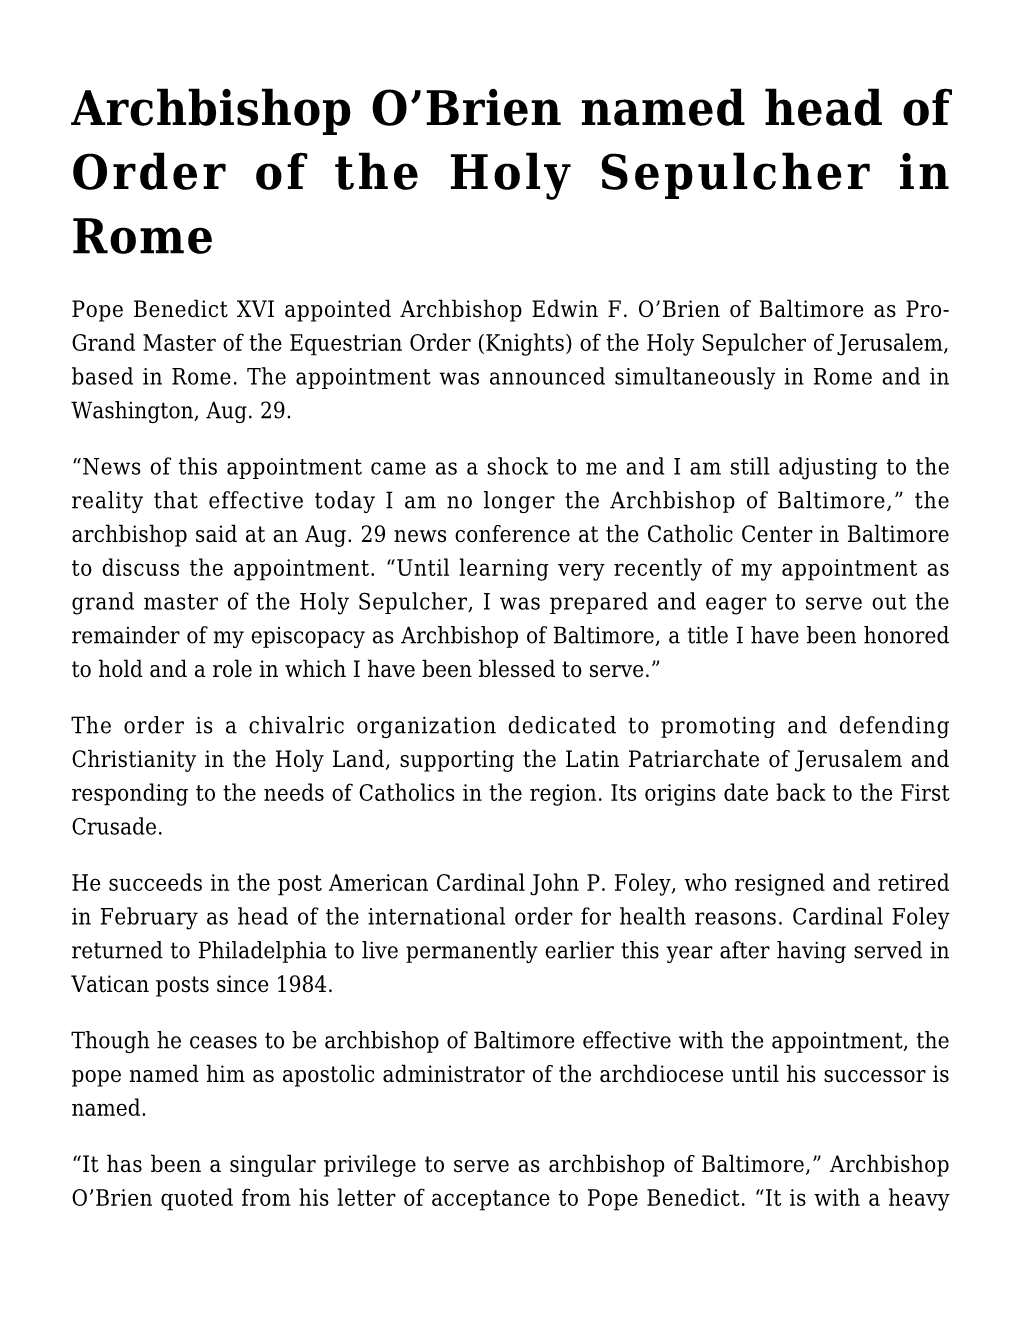 Archbishop O'brien Named Head of Order of the Holy Sepulcher in Rome